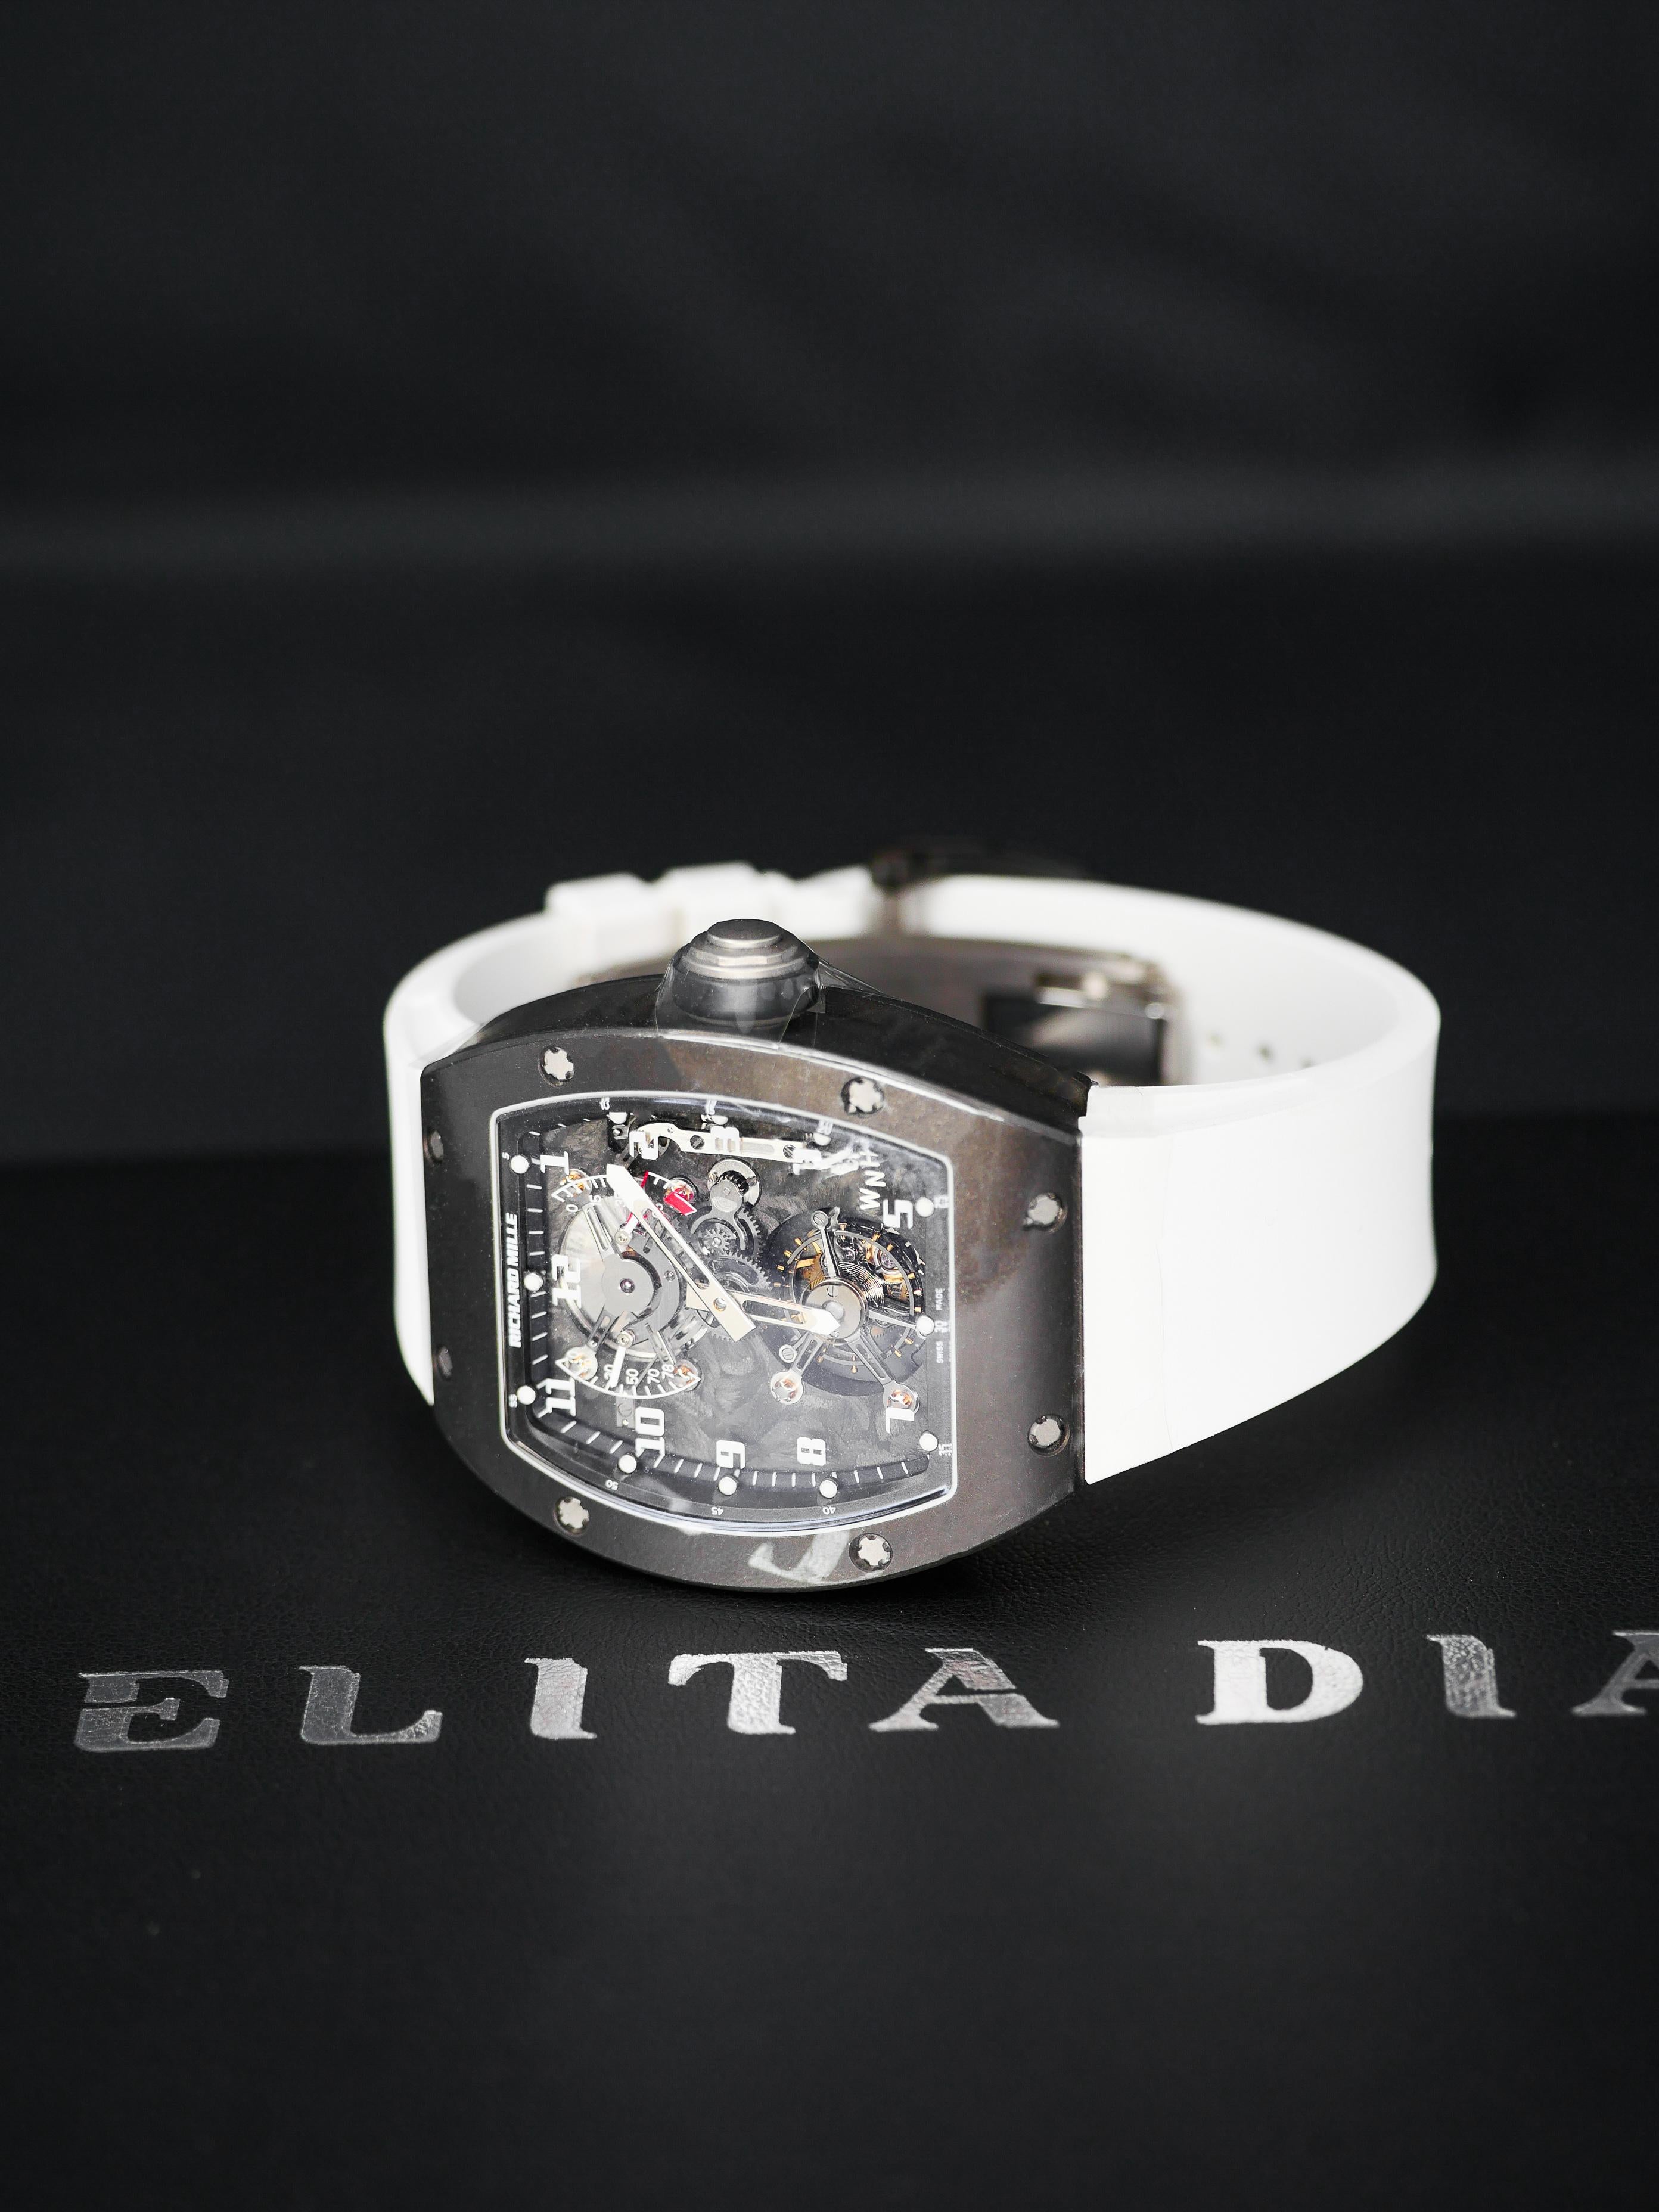 Elita Diamonds Are The Experts When It Comes To Ultra Rare Exotic Horology.   Finding Timepieces Of Serious Magnitude And Rarity That Can Not Be Easily Found Is Our Speciality.    Richard Mille Rm 002 Tourbillion  Brand New   Don't Miss Out This